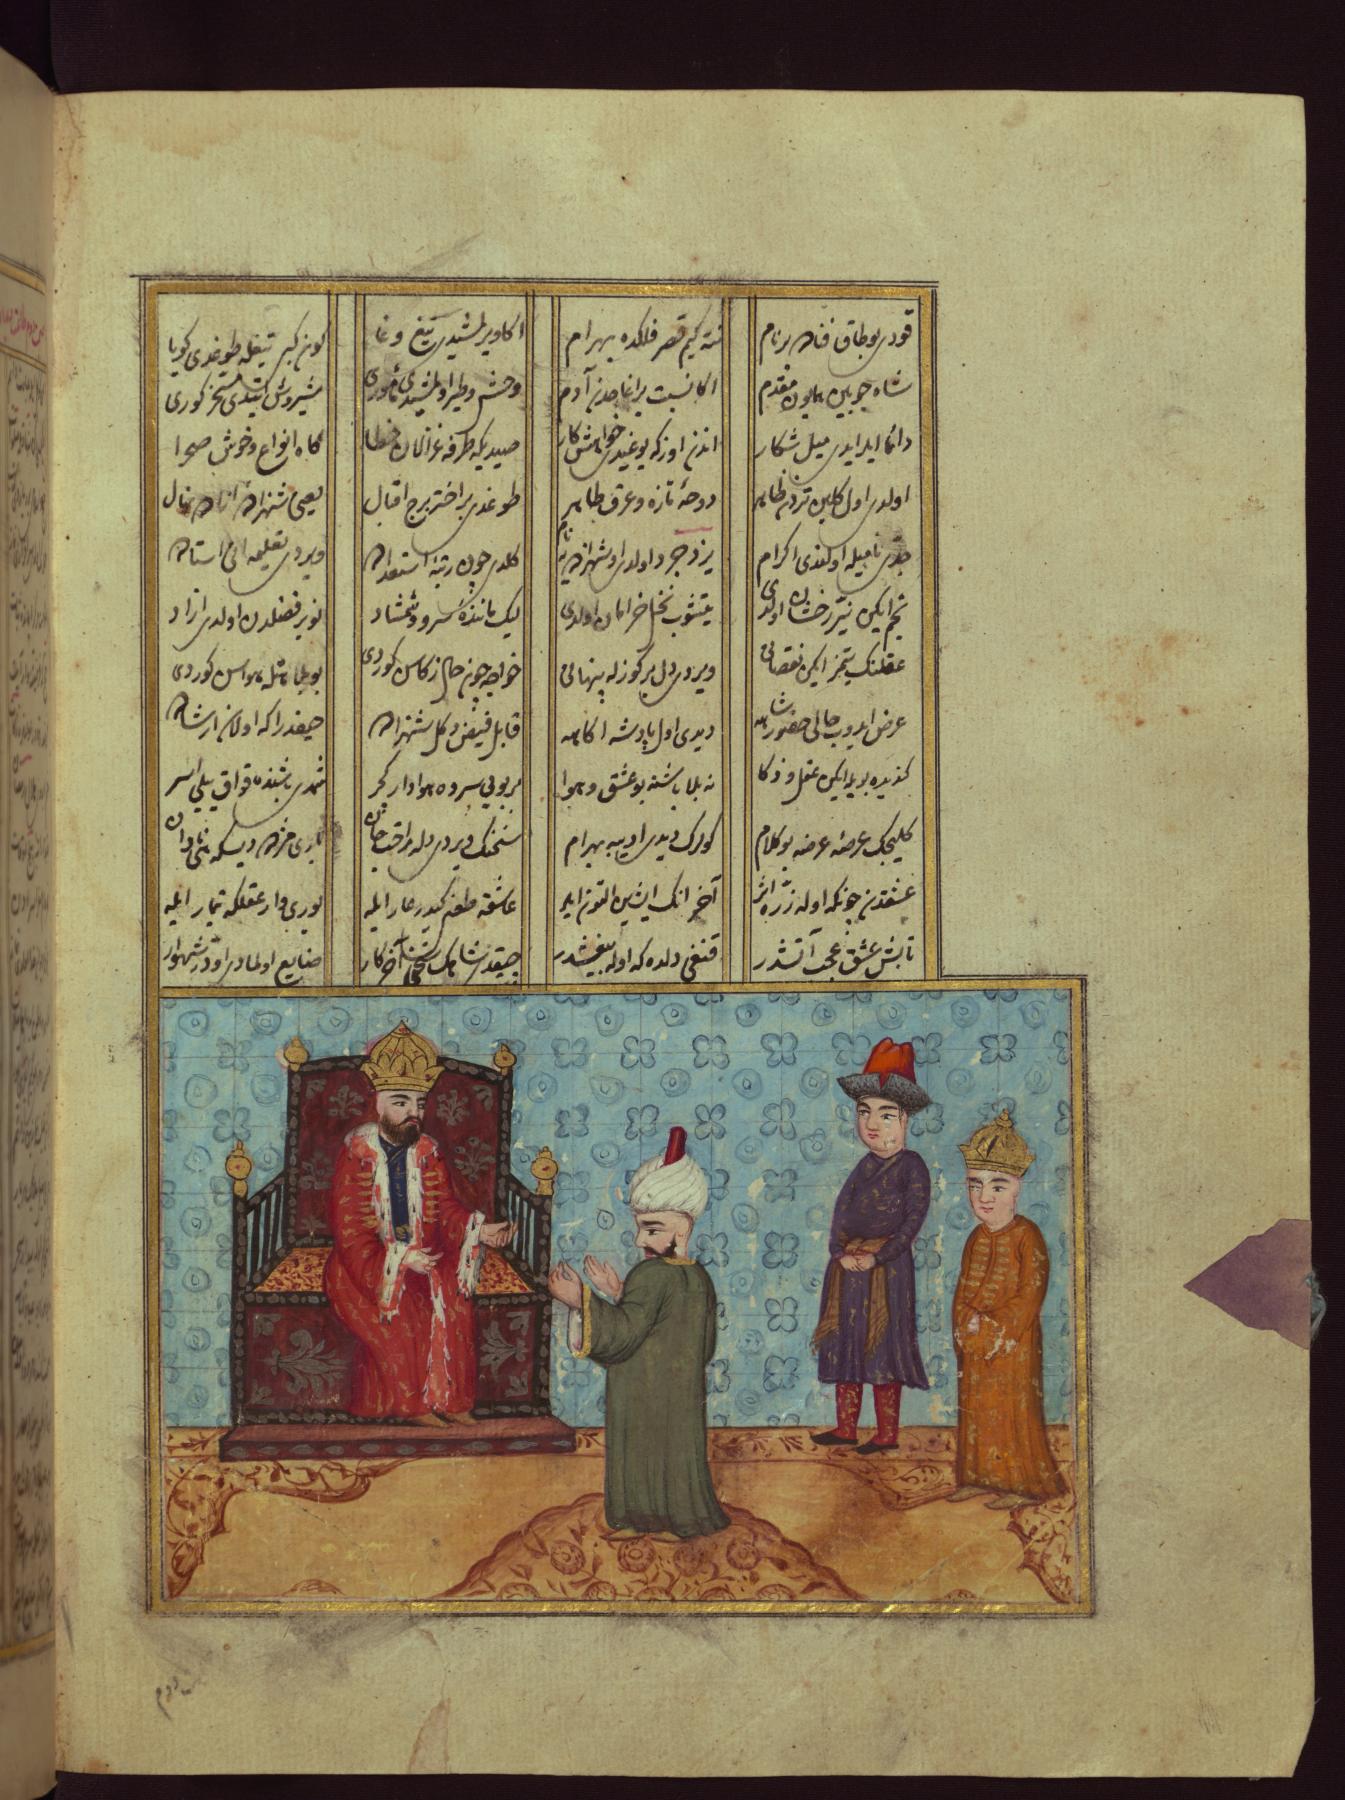 Image for A Messenger from Seljuk Sultan Meliksah Being Received by the Byzantine King